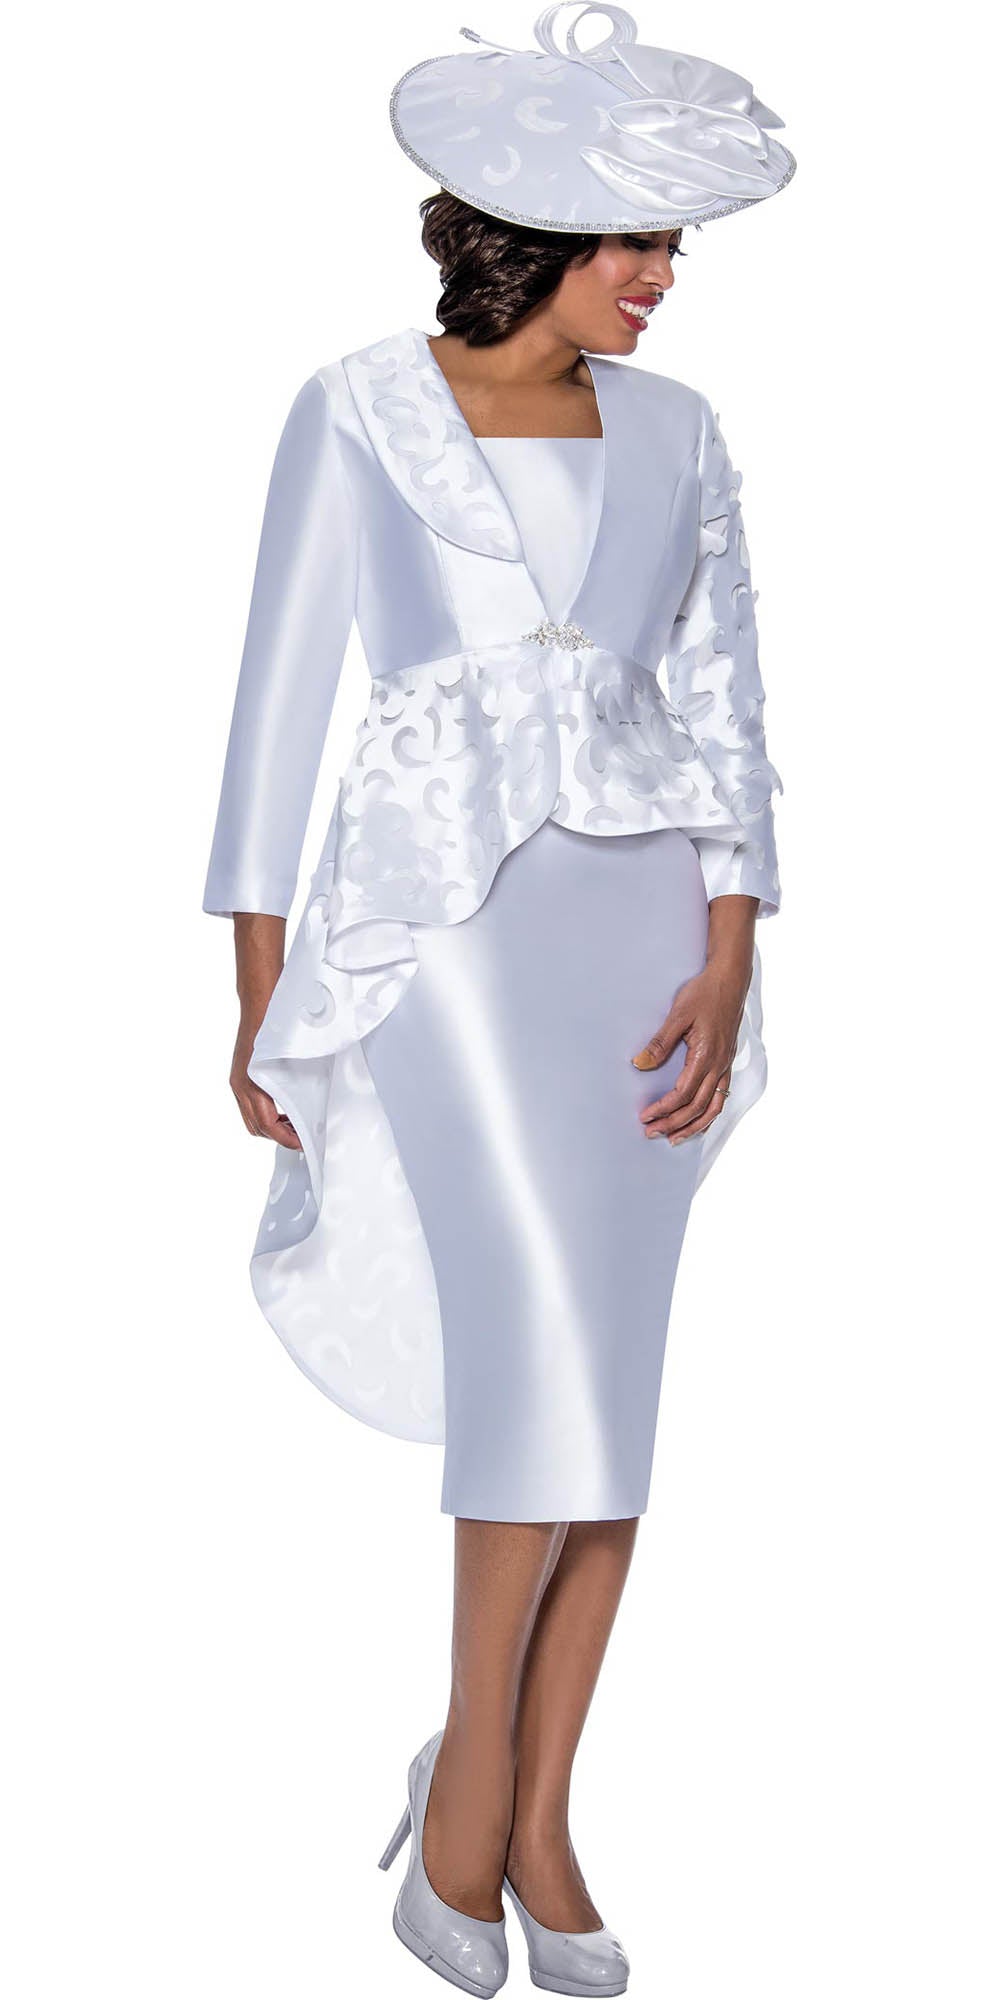 GMI G9003 - White - Layered Cutout High Low Jacket with Rhinestone Clasp Womens Suit